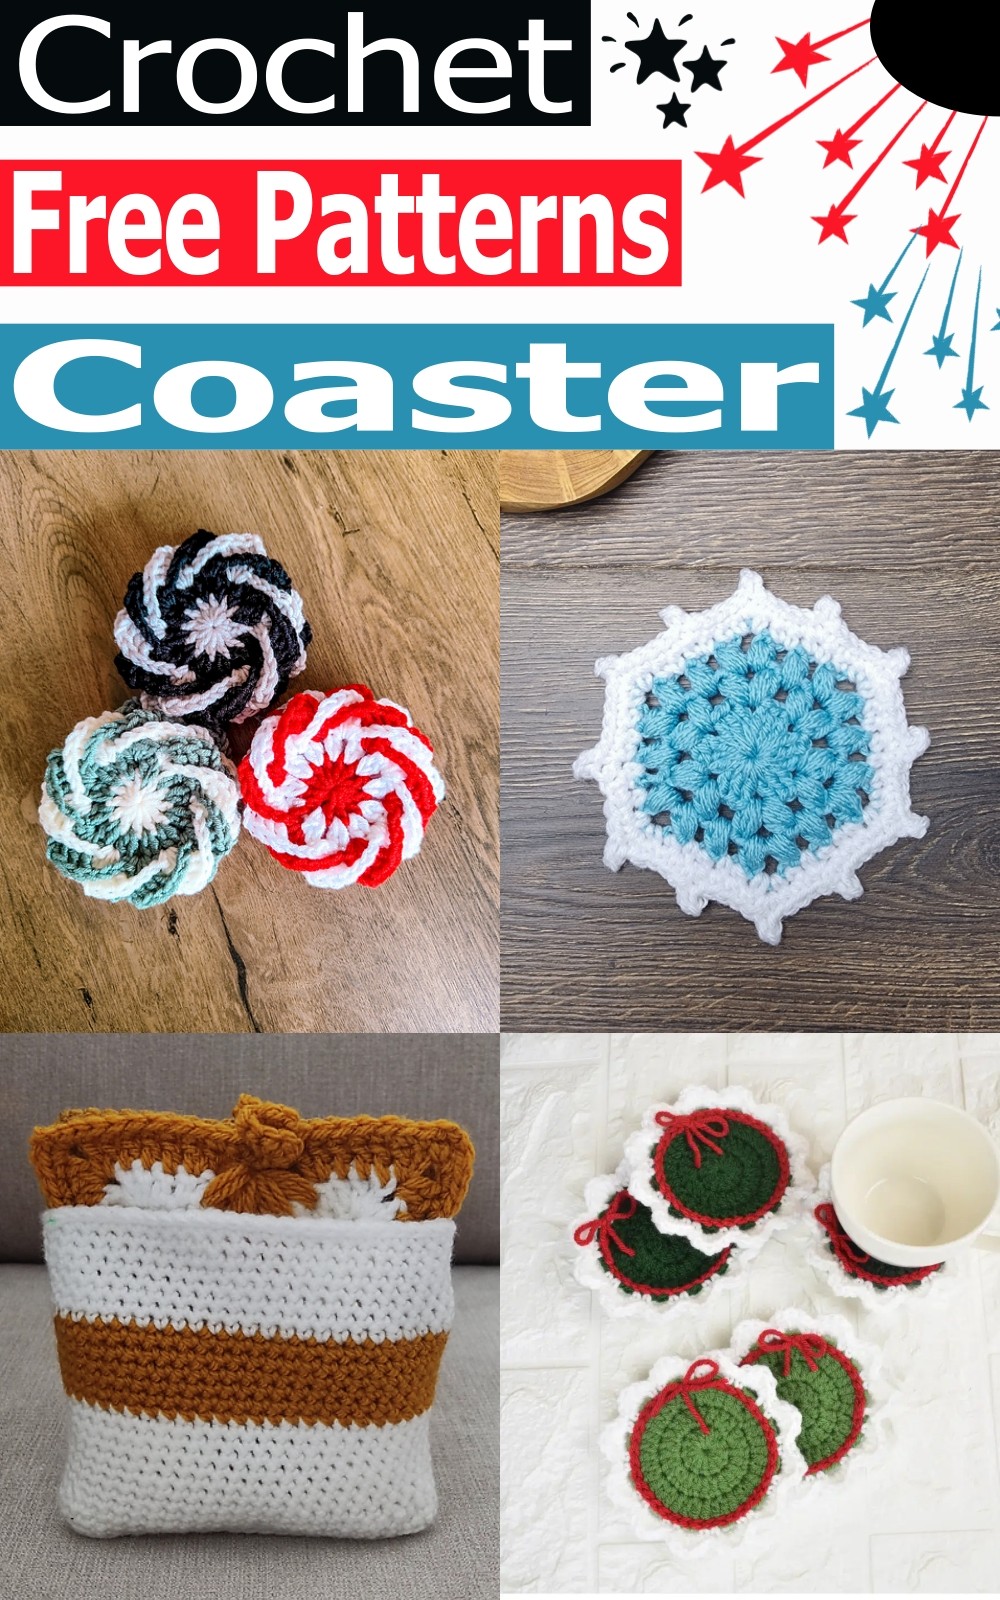 17 Free Crochet Coaster Patterns & Tips For Beginners